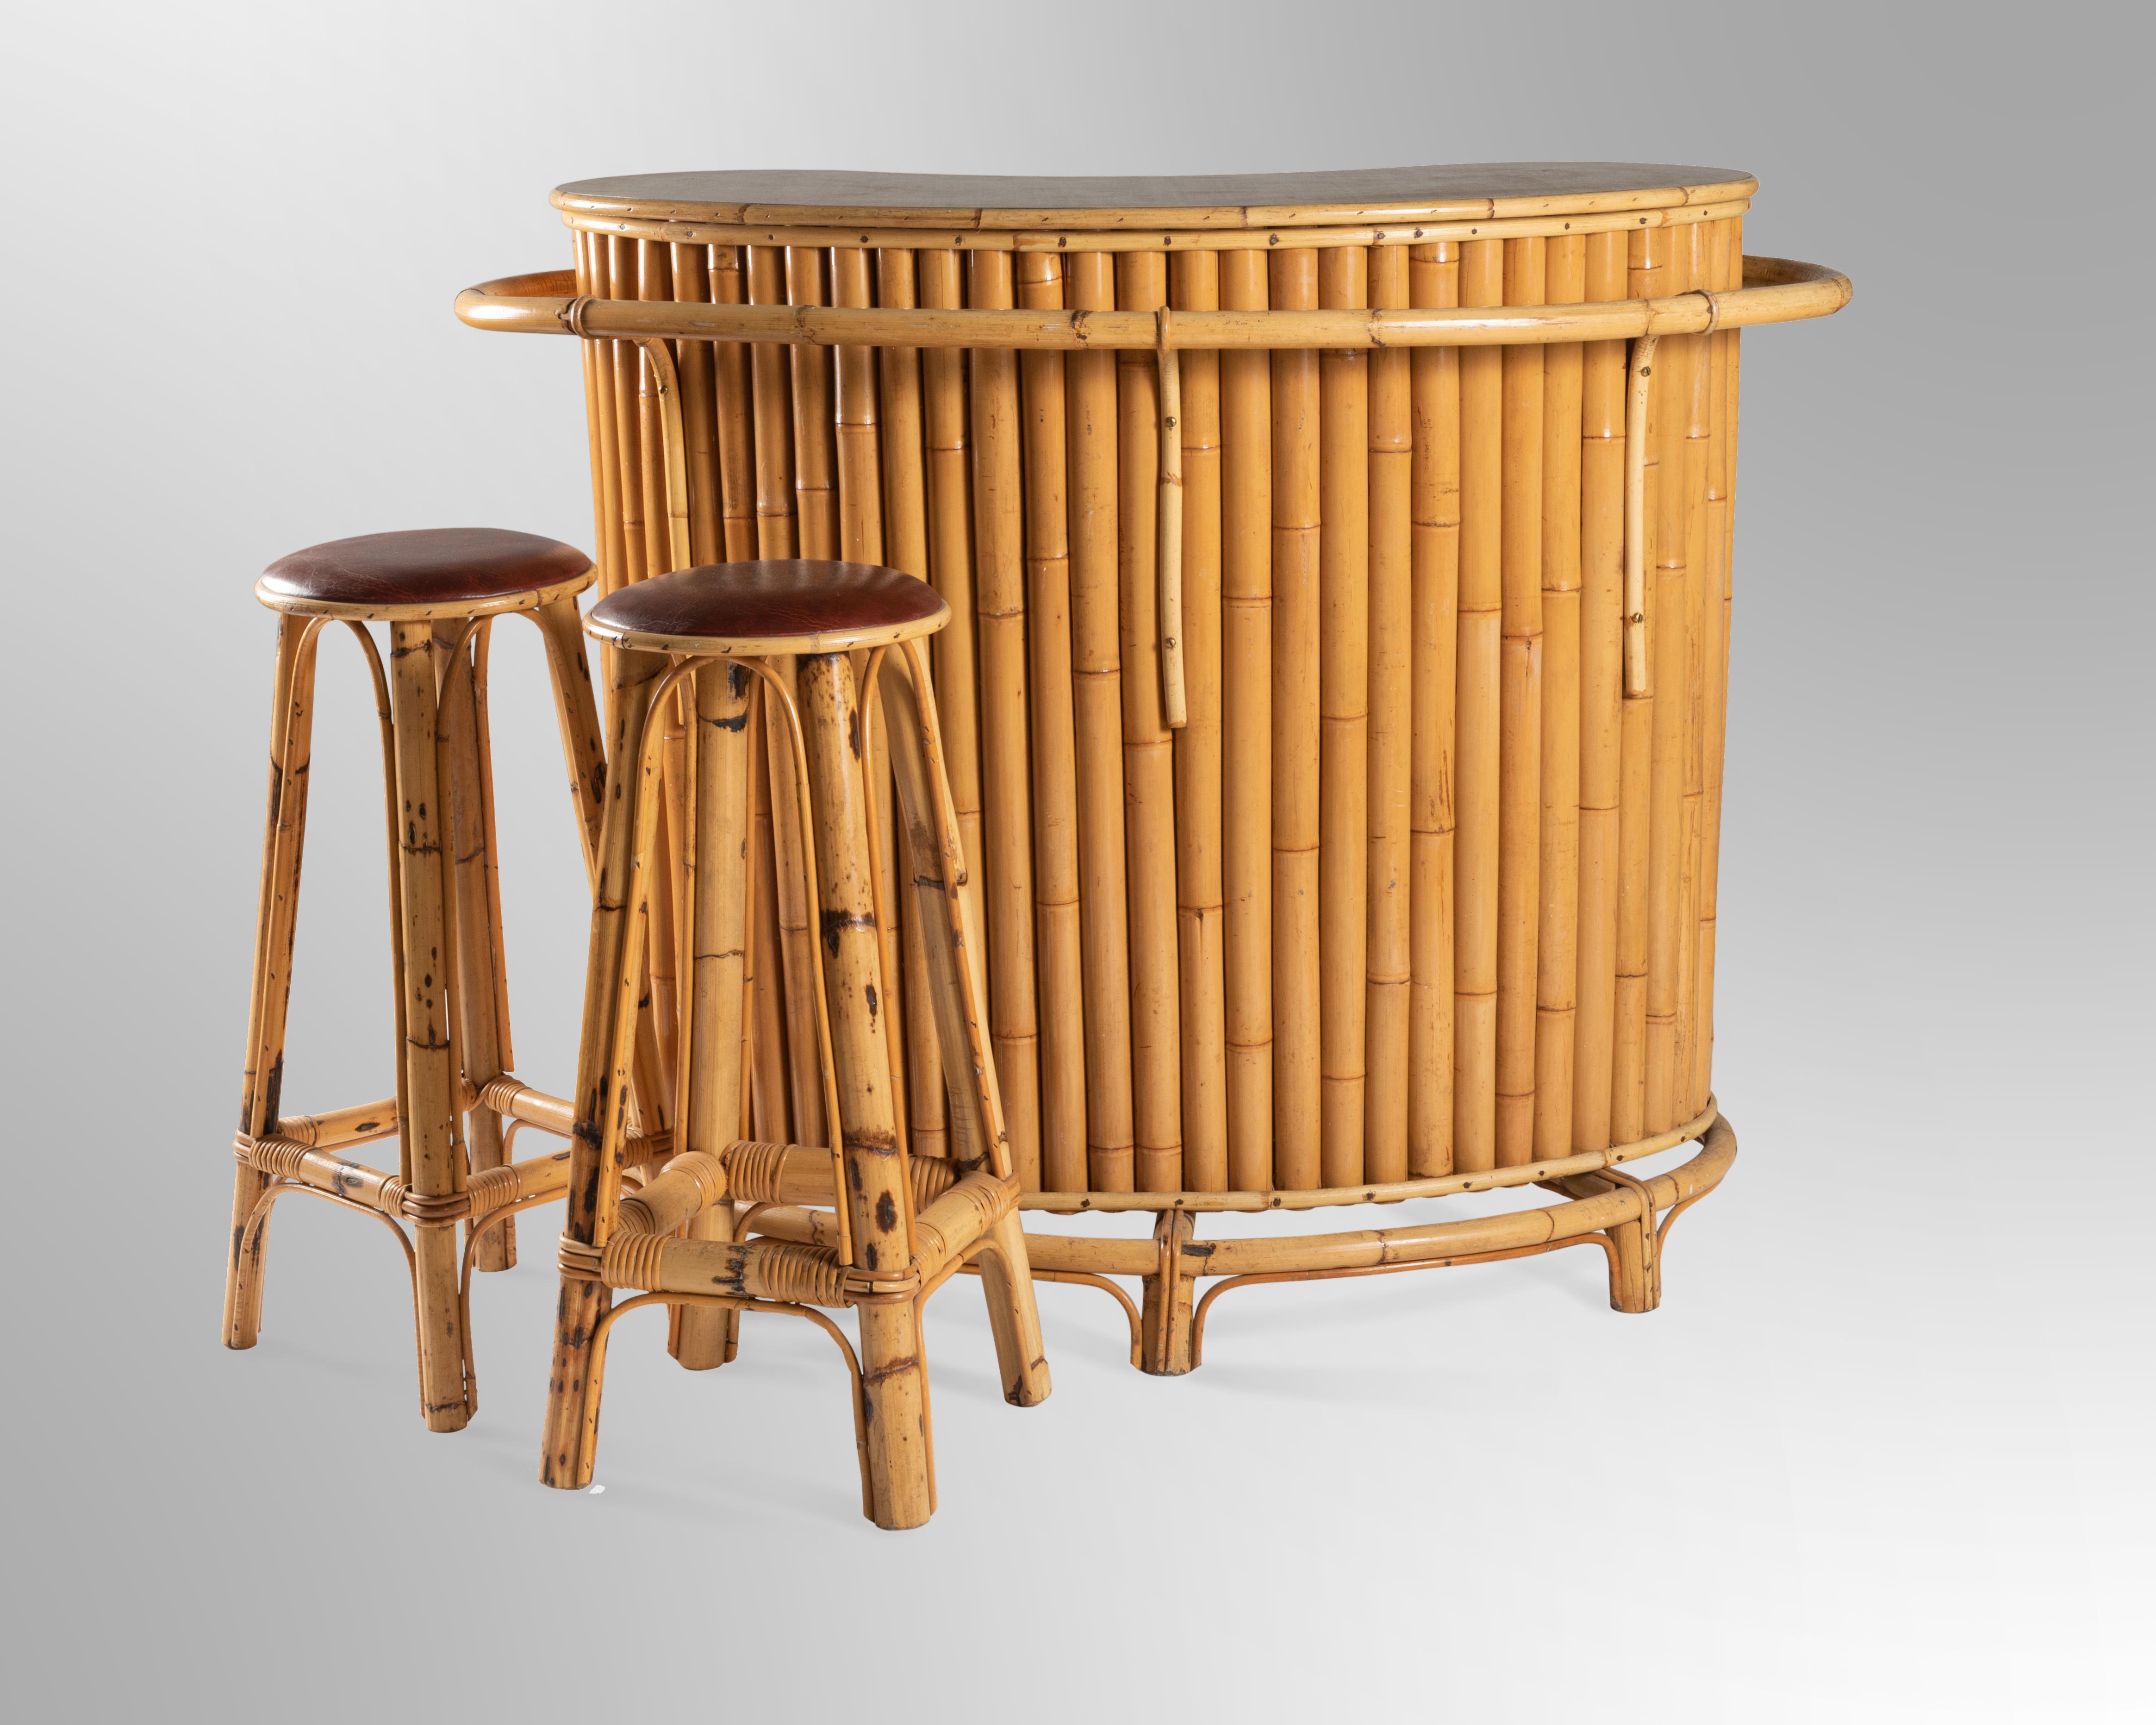 French Riviera vintage bar and pair of stools in bamboo. The bar top is in faux wood. Made in the South of France in the 1950s.

Dimensions:

Bar
H - 116cm
L- 130cm
P - 115cm

Stools (2)
H - 73cm (seat diameter - 32cm)
L - 35cm
P -